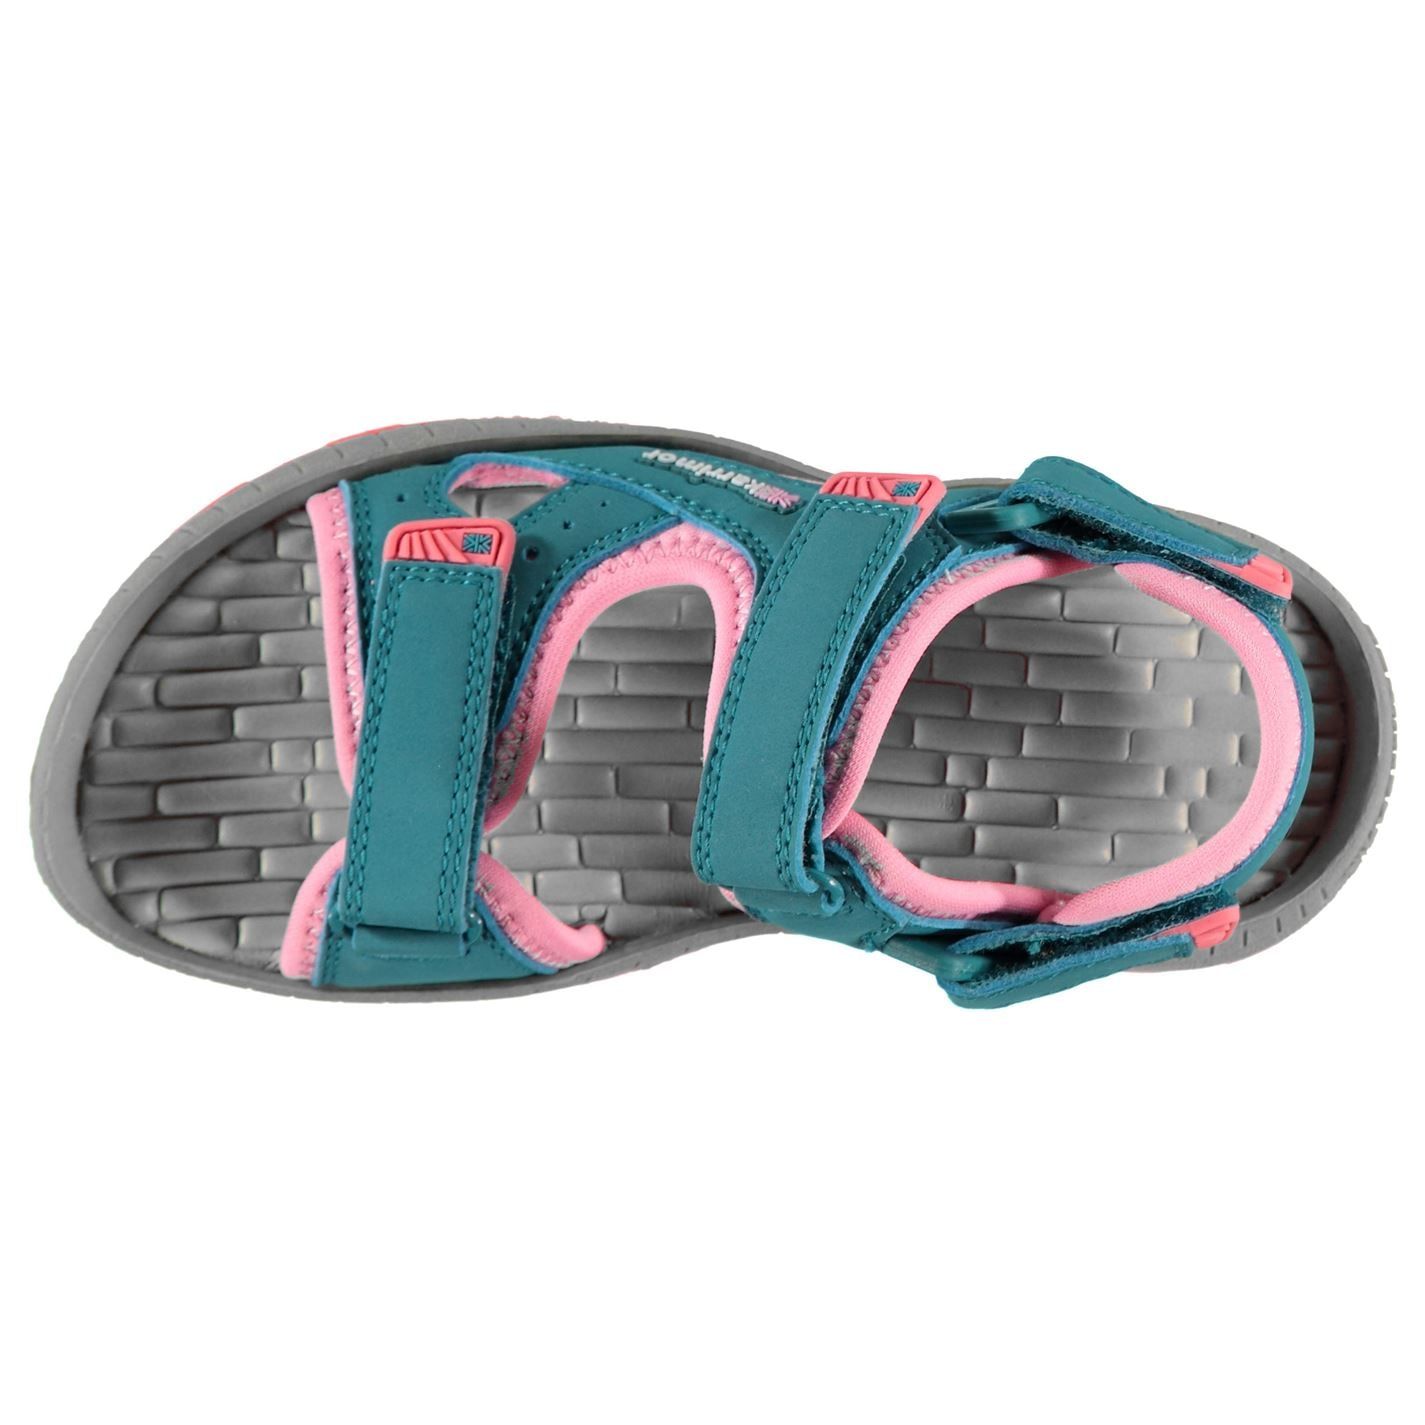 Karrimor Kids Antibes Sandals Shoes Hook and Loop Rubberised Outsole Summer